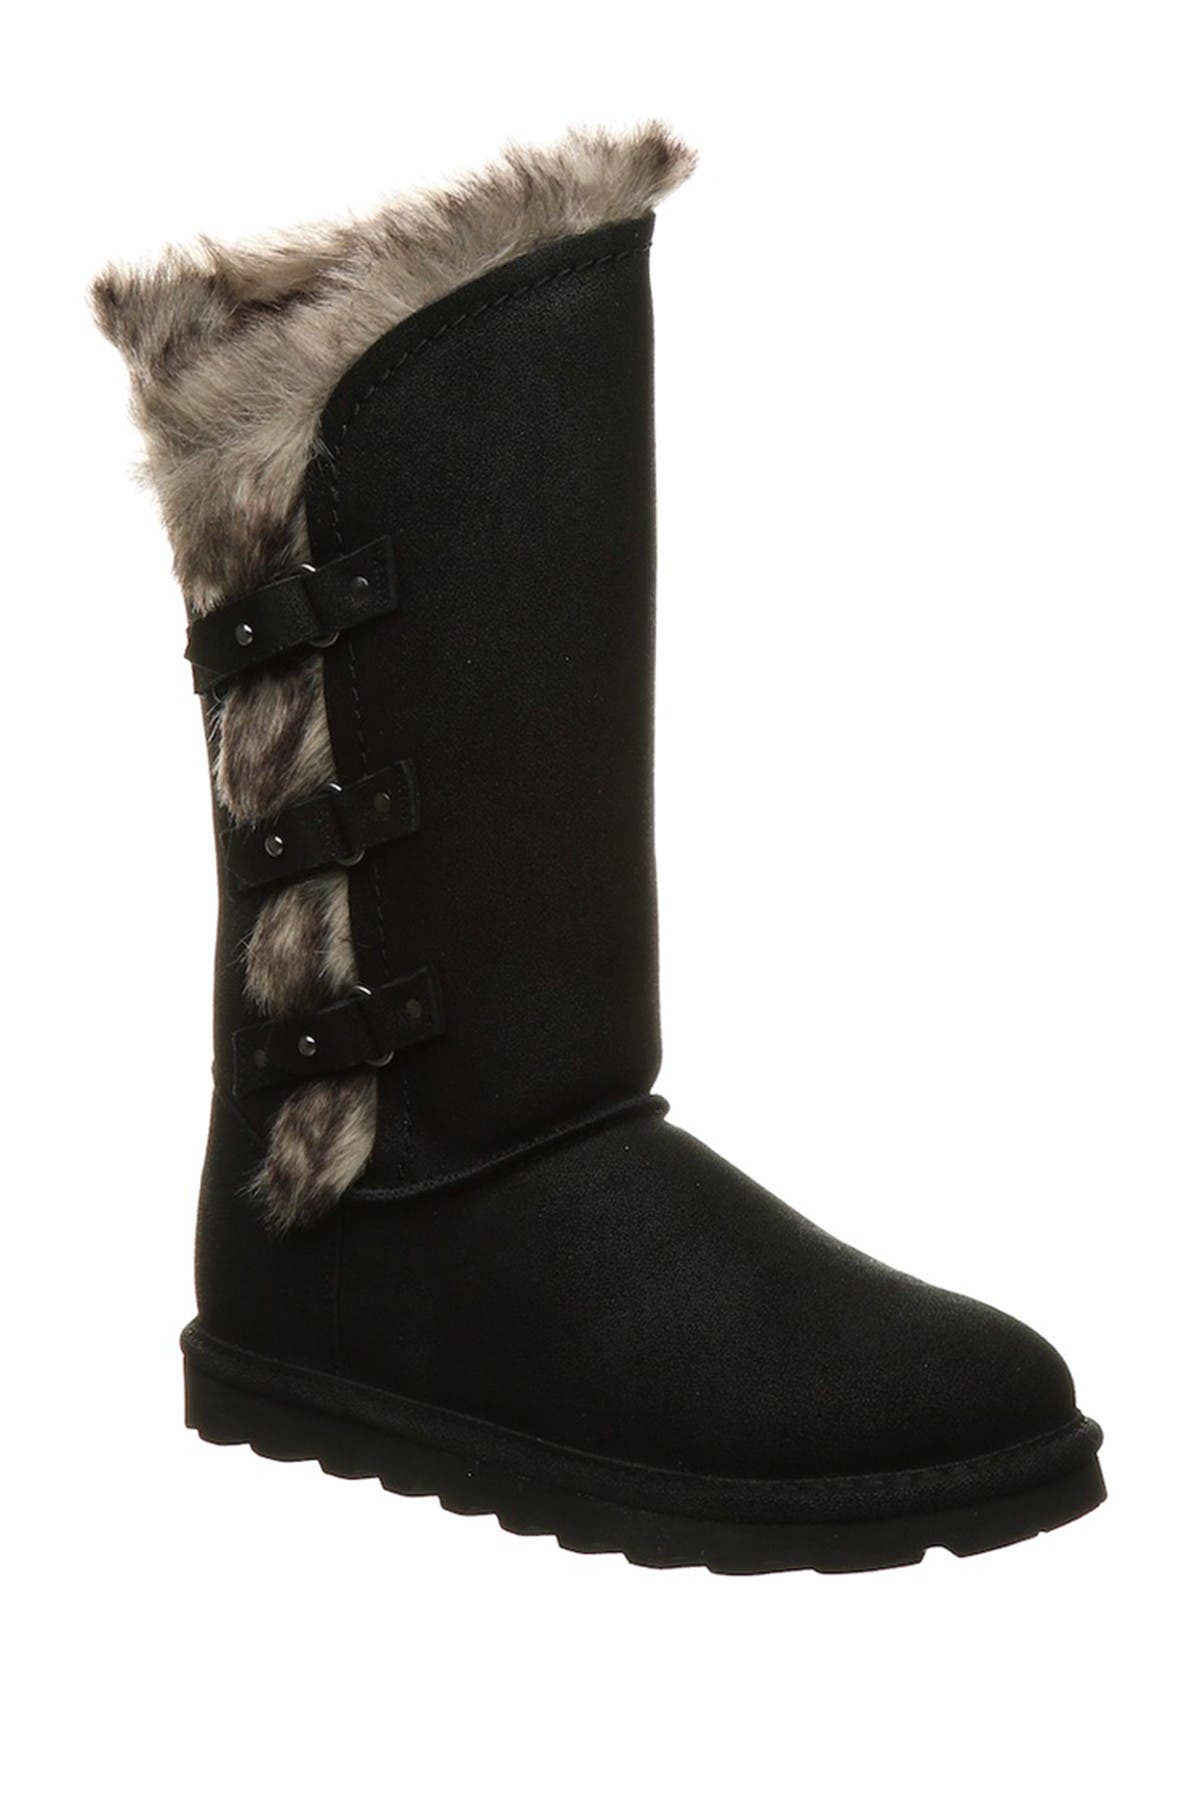 bearpaw over the knee boots